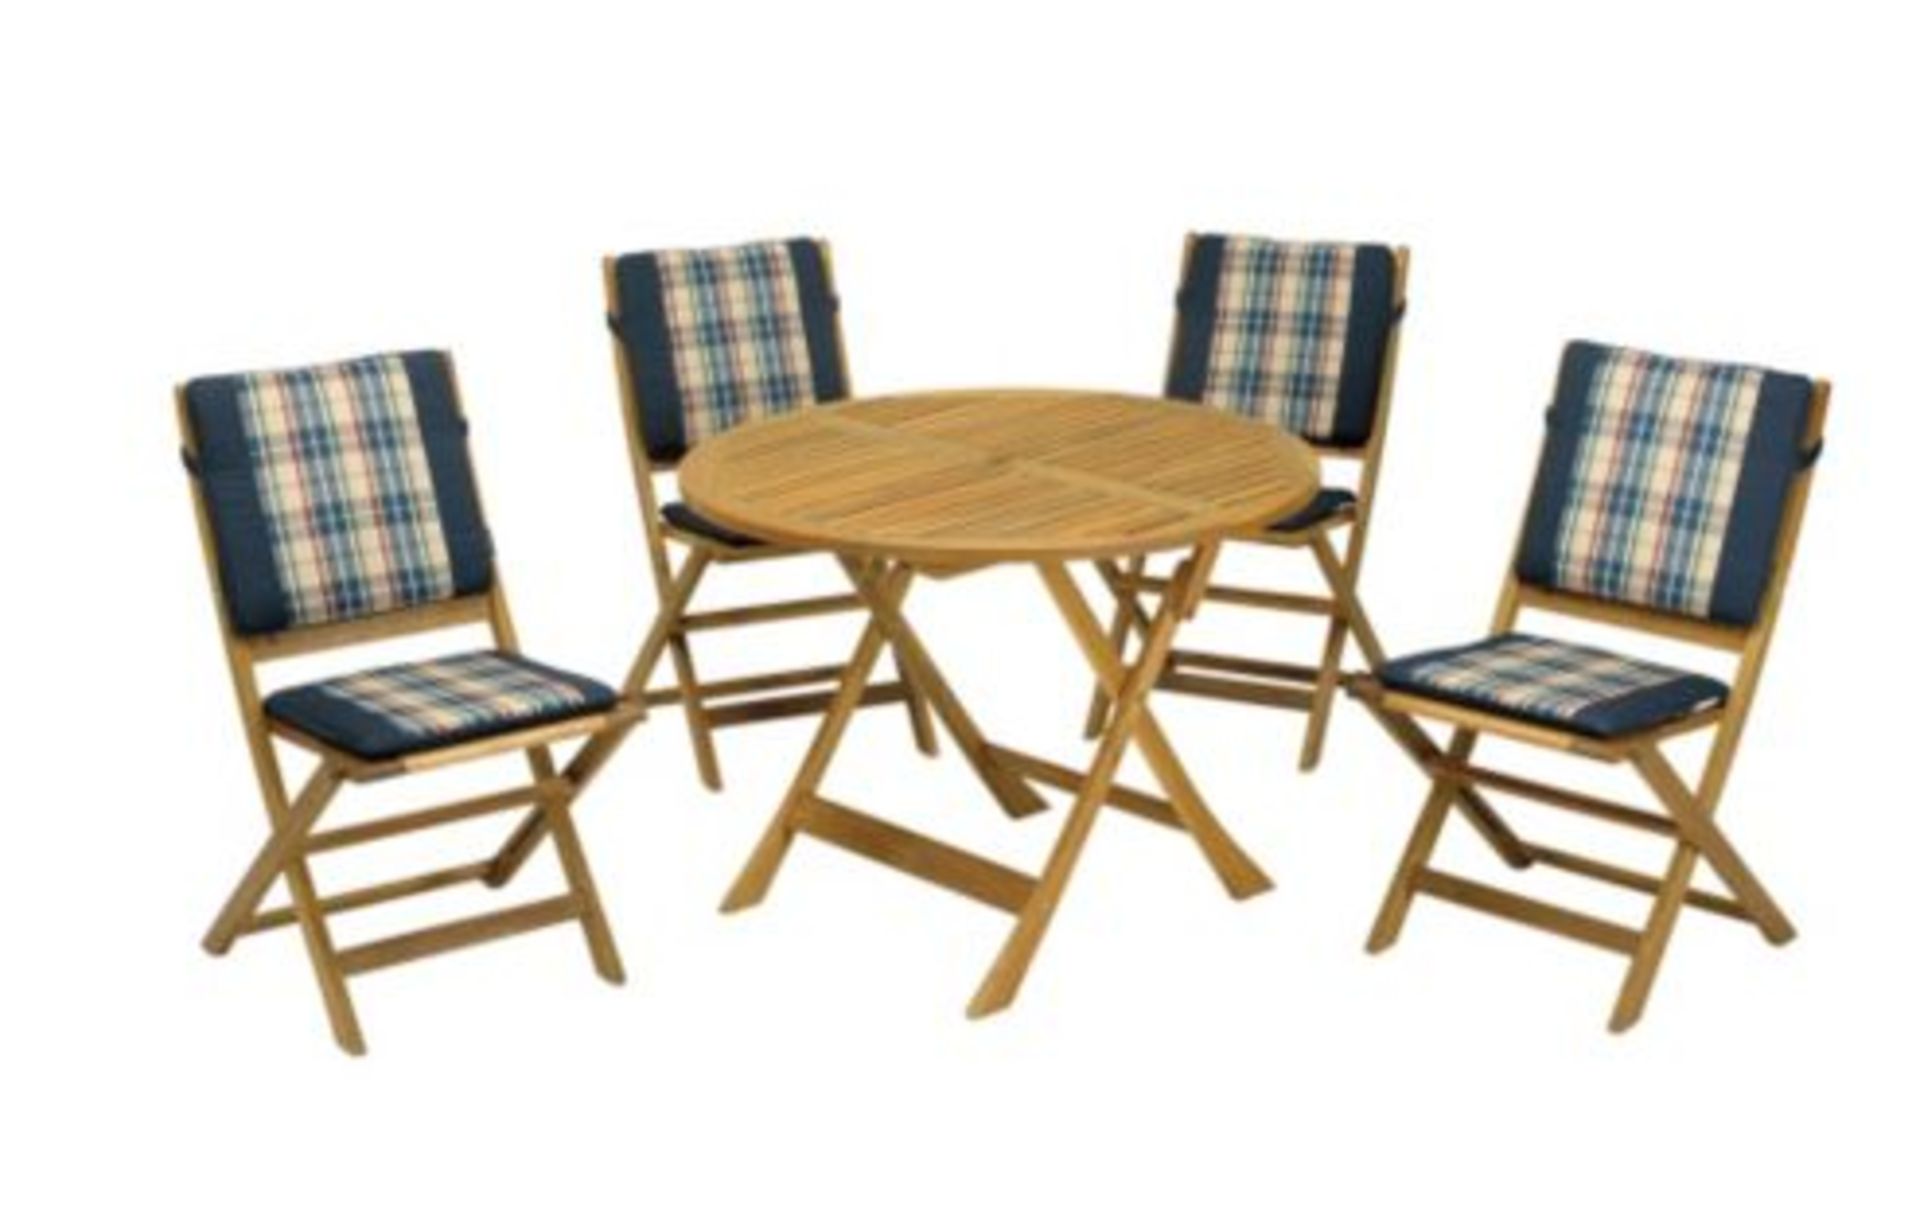 V Brand New Manhatten Double Folding Table With Four Chairs - 2m Parasol And Cushions (Set